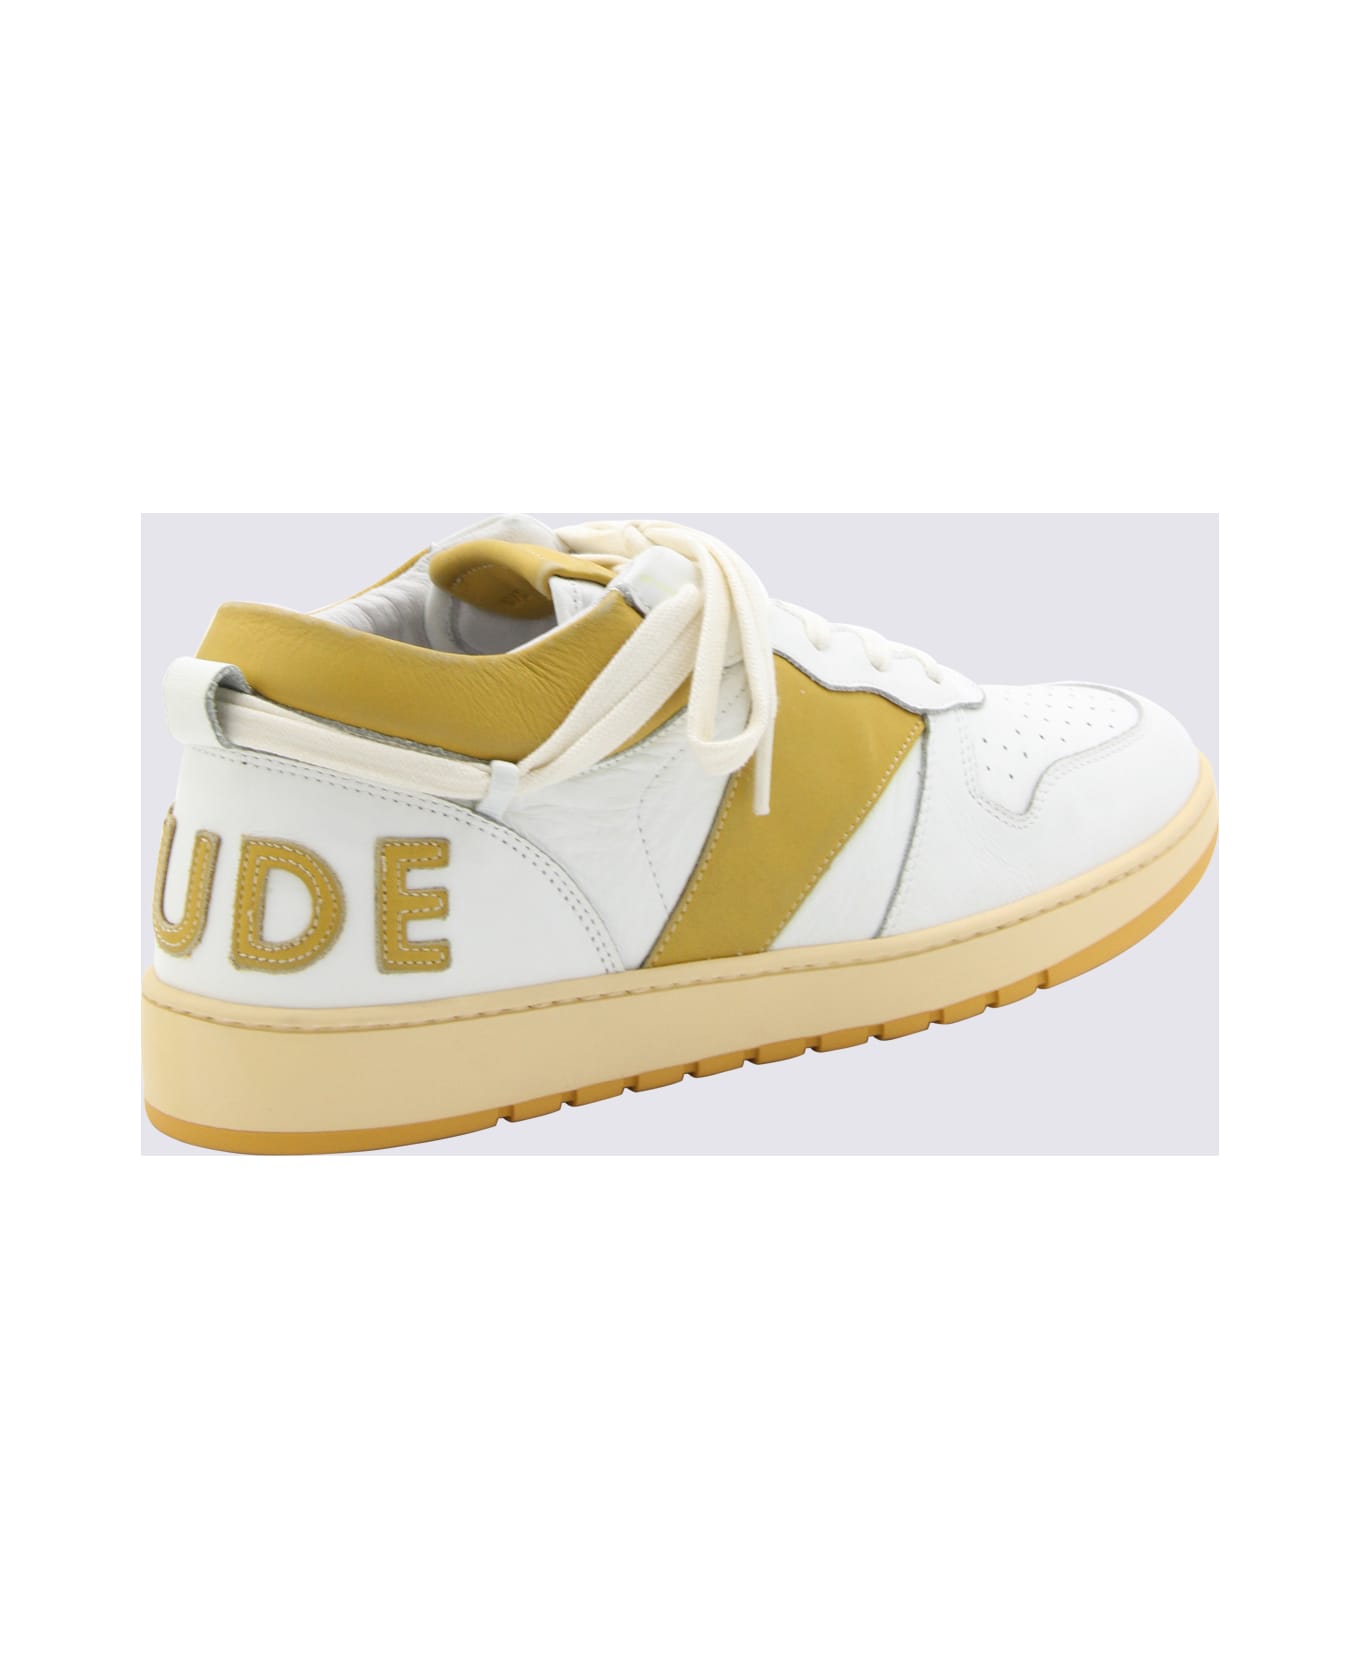 Rhude White And Mustard Leather Sneakers - WHITE/MUSTARD